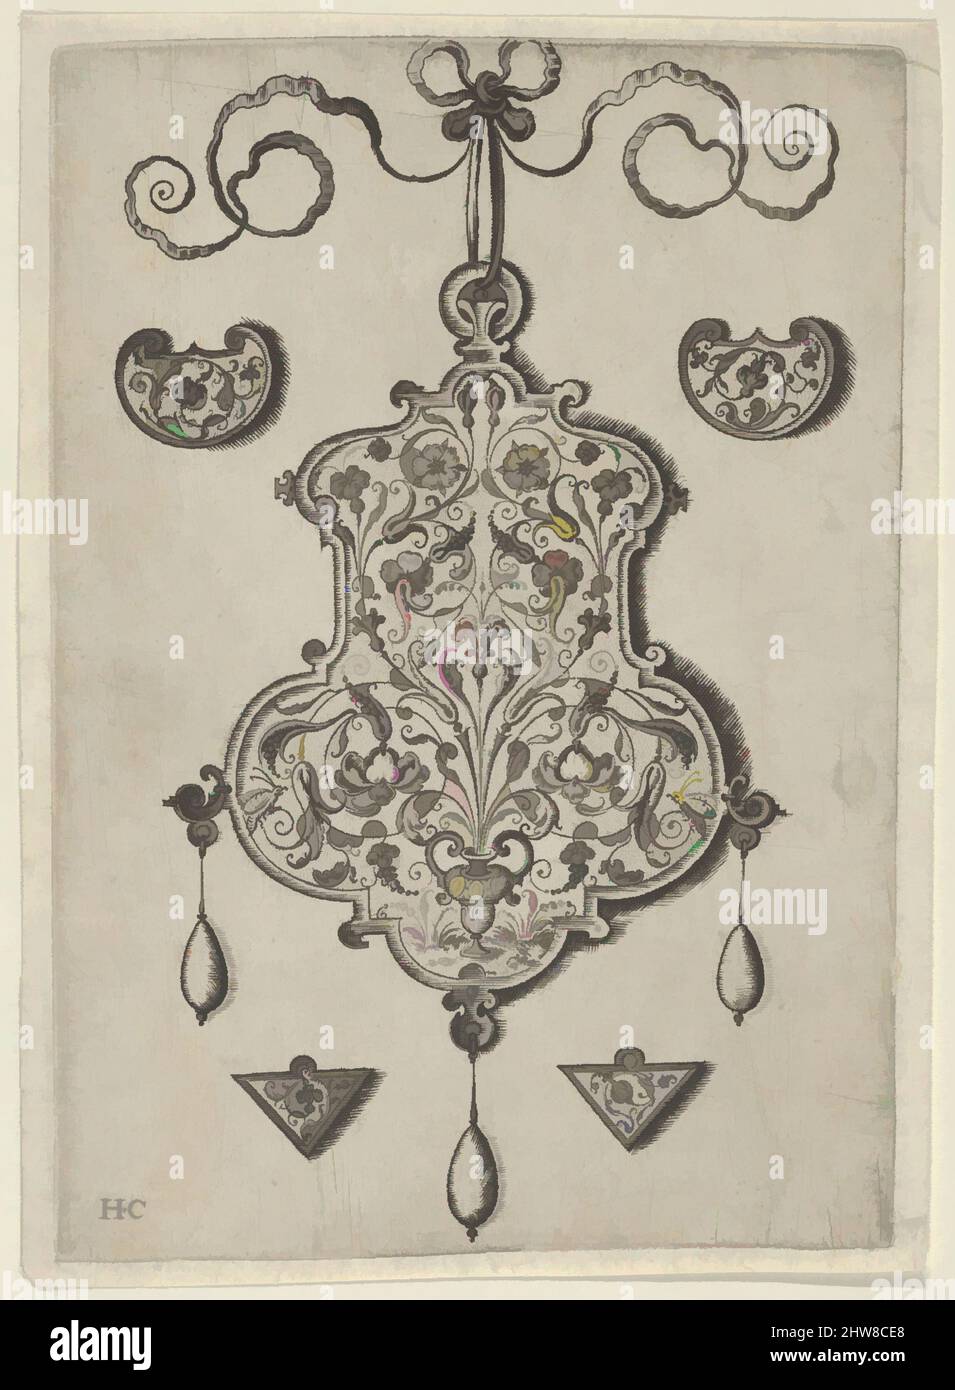 Art inspired by Design for the Verso of a Pendant with a Flower-Piece at Bottom Center, before 1573, Engraving; first state of two (New Hollstein), Sheet: 5 3/4 × 3 7/8 in. (14.6 × 9.8 cm), Jan Collaert I (Netherlandish, Antwerp ca. 1530–1581 Antwerp), Vertical panel with the design, Classic works modernized by Artotop with a splash of modernity. Shapes, color and value, eye-catching visual impact on art. Emotions through freedom of artworks in a contemporary way. A timeless message pursuing a wildly creative new direction. Artists turning to the digital medium and creating the Artotop NFT Stock Photo